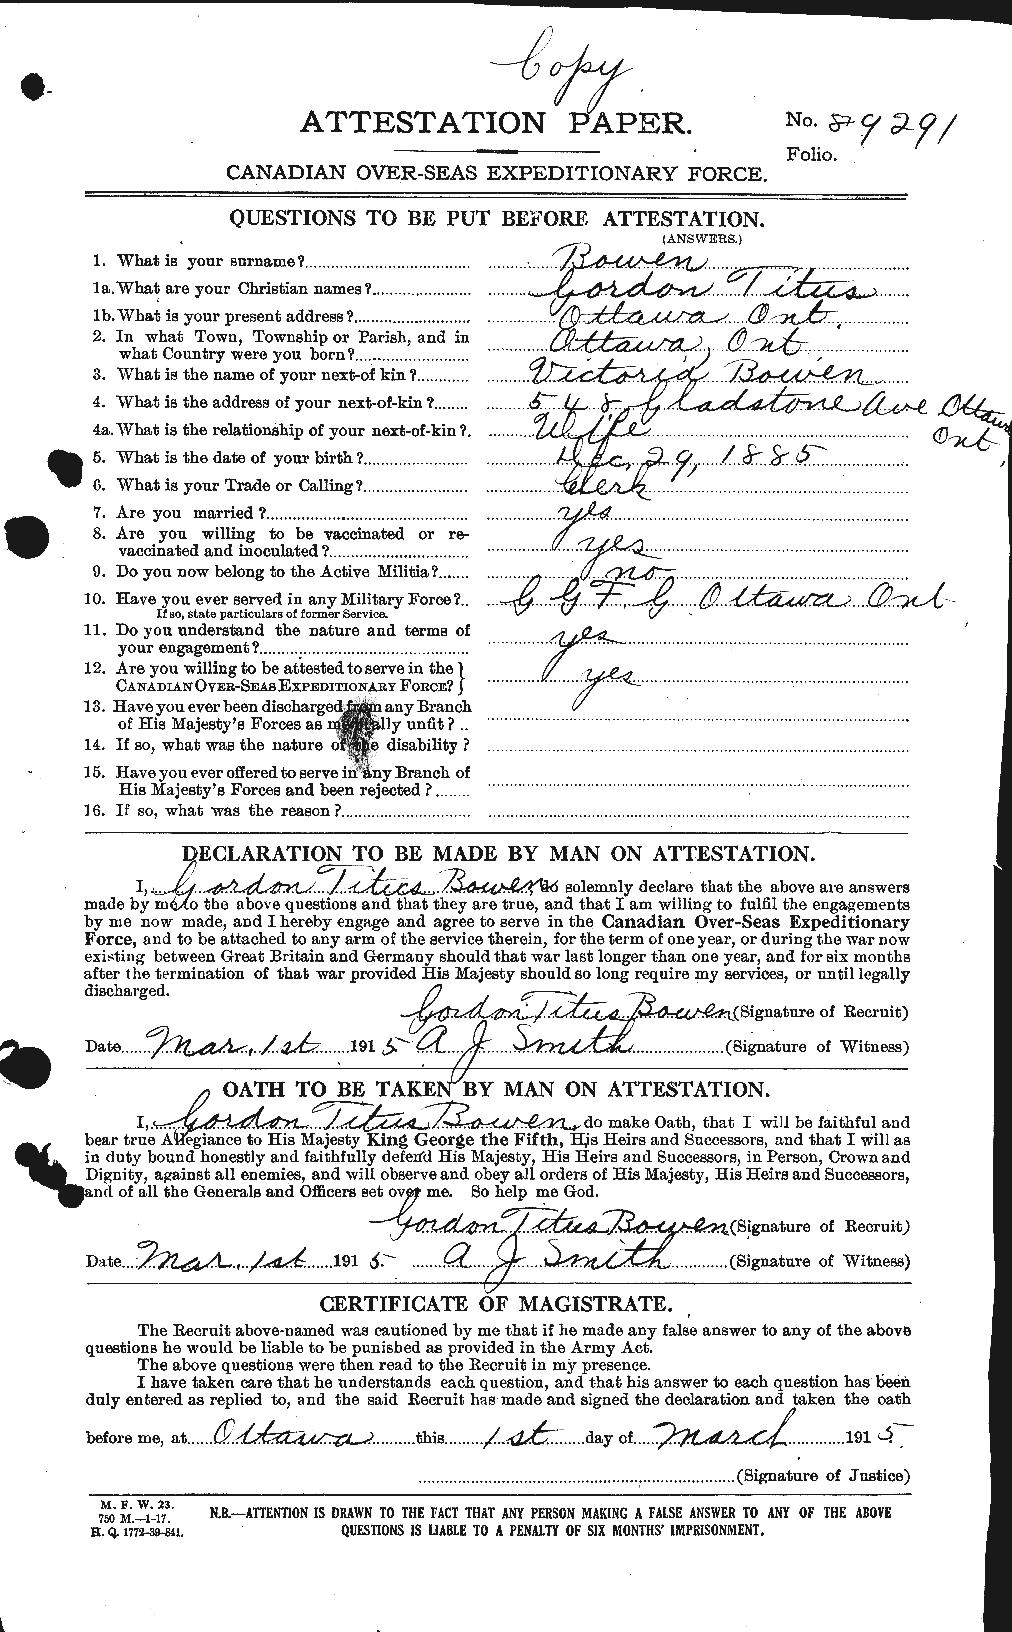 Personnel Records of the First World War - CEF 255408a